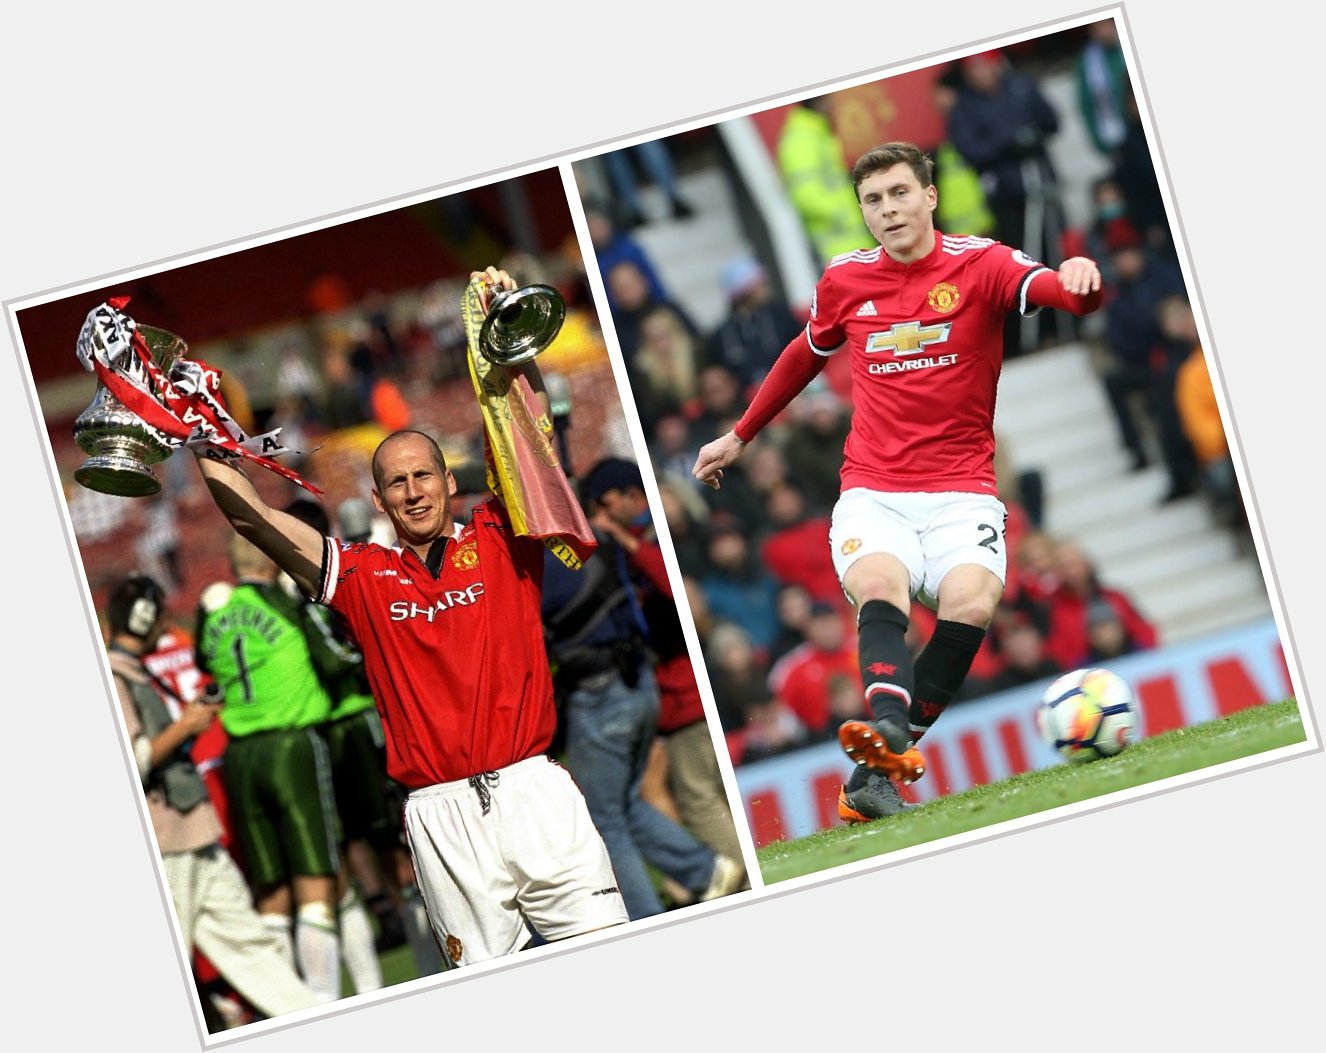 A very happy birthday to Jaap Stam and Victor Lindelof! 